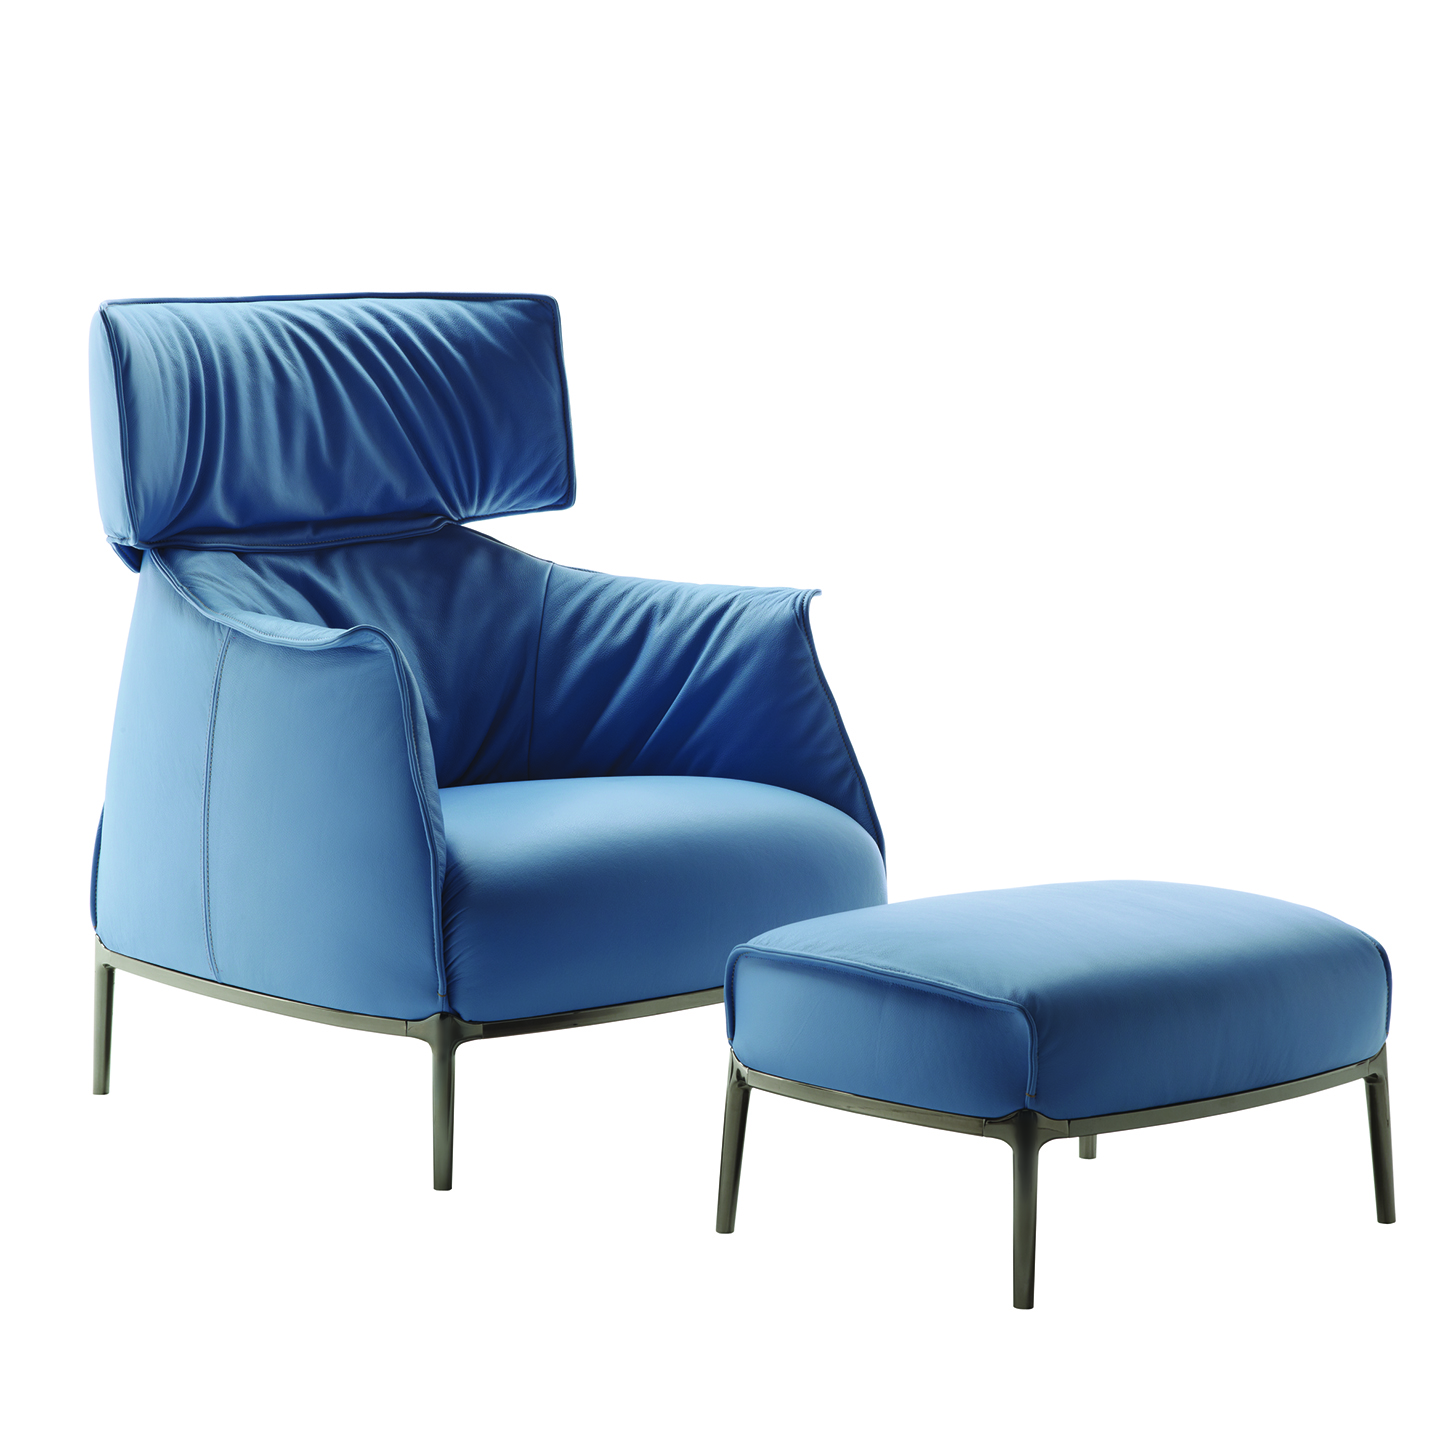 Haworth High Back Archibald lounge chair with ottoman in blue color